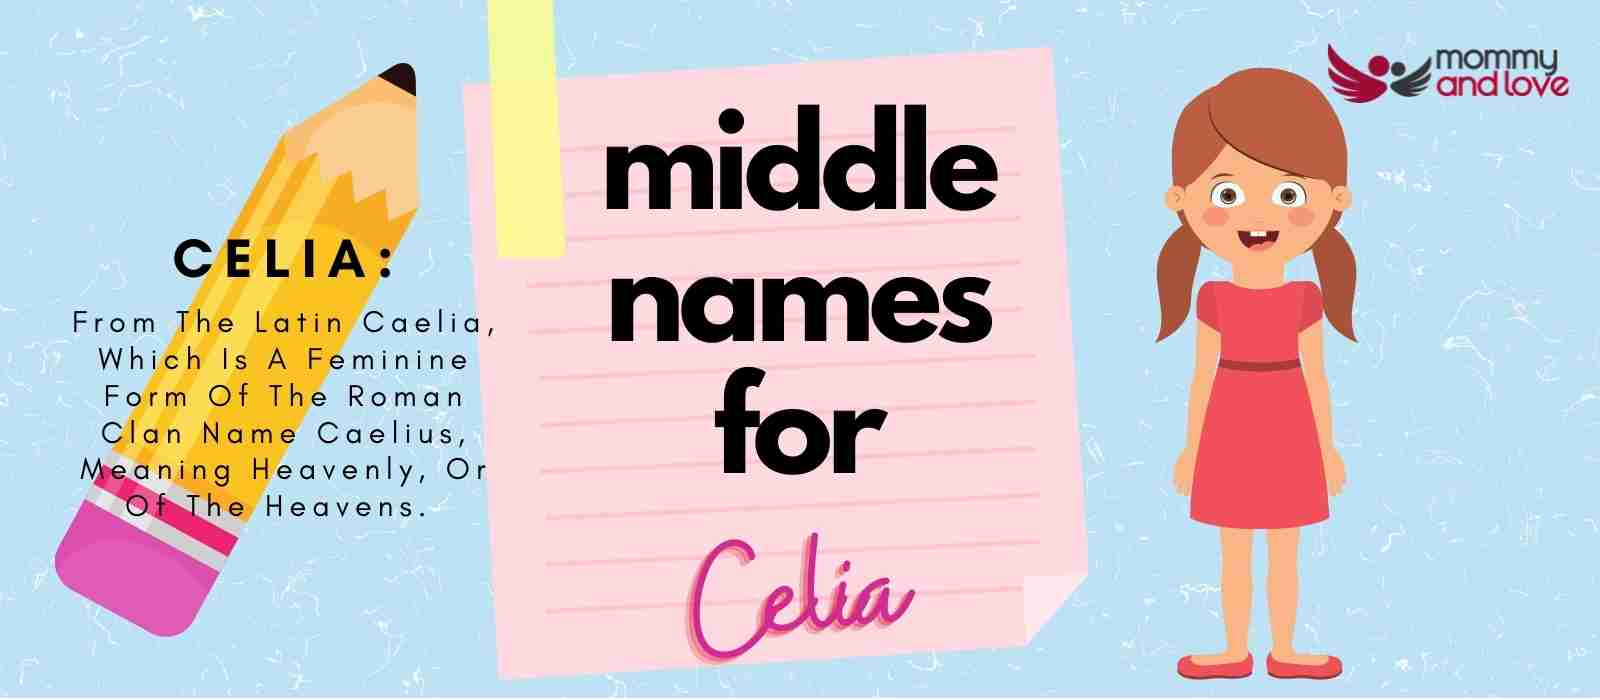 Middle Names for Celia